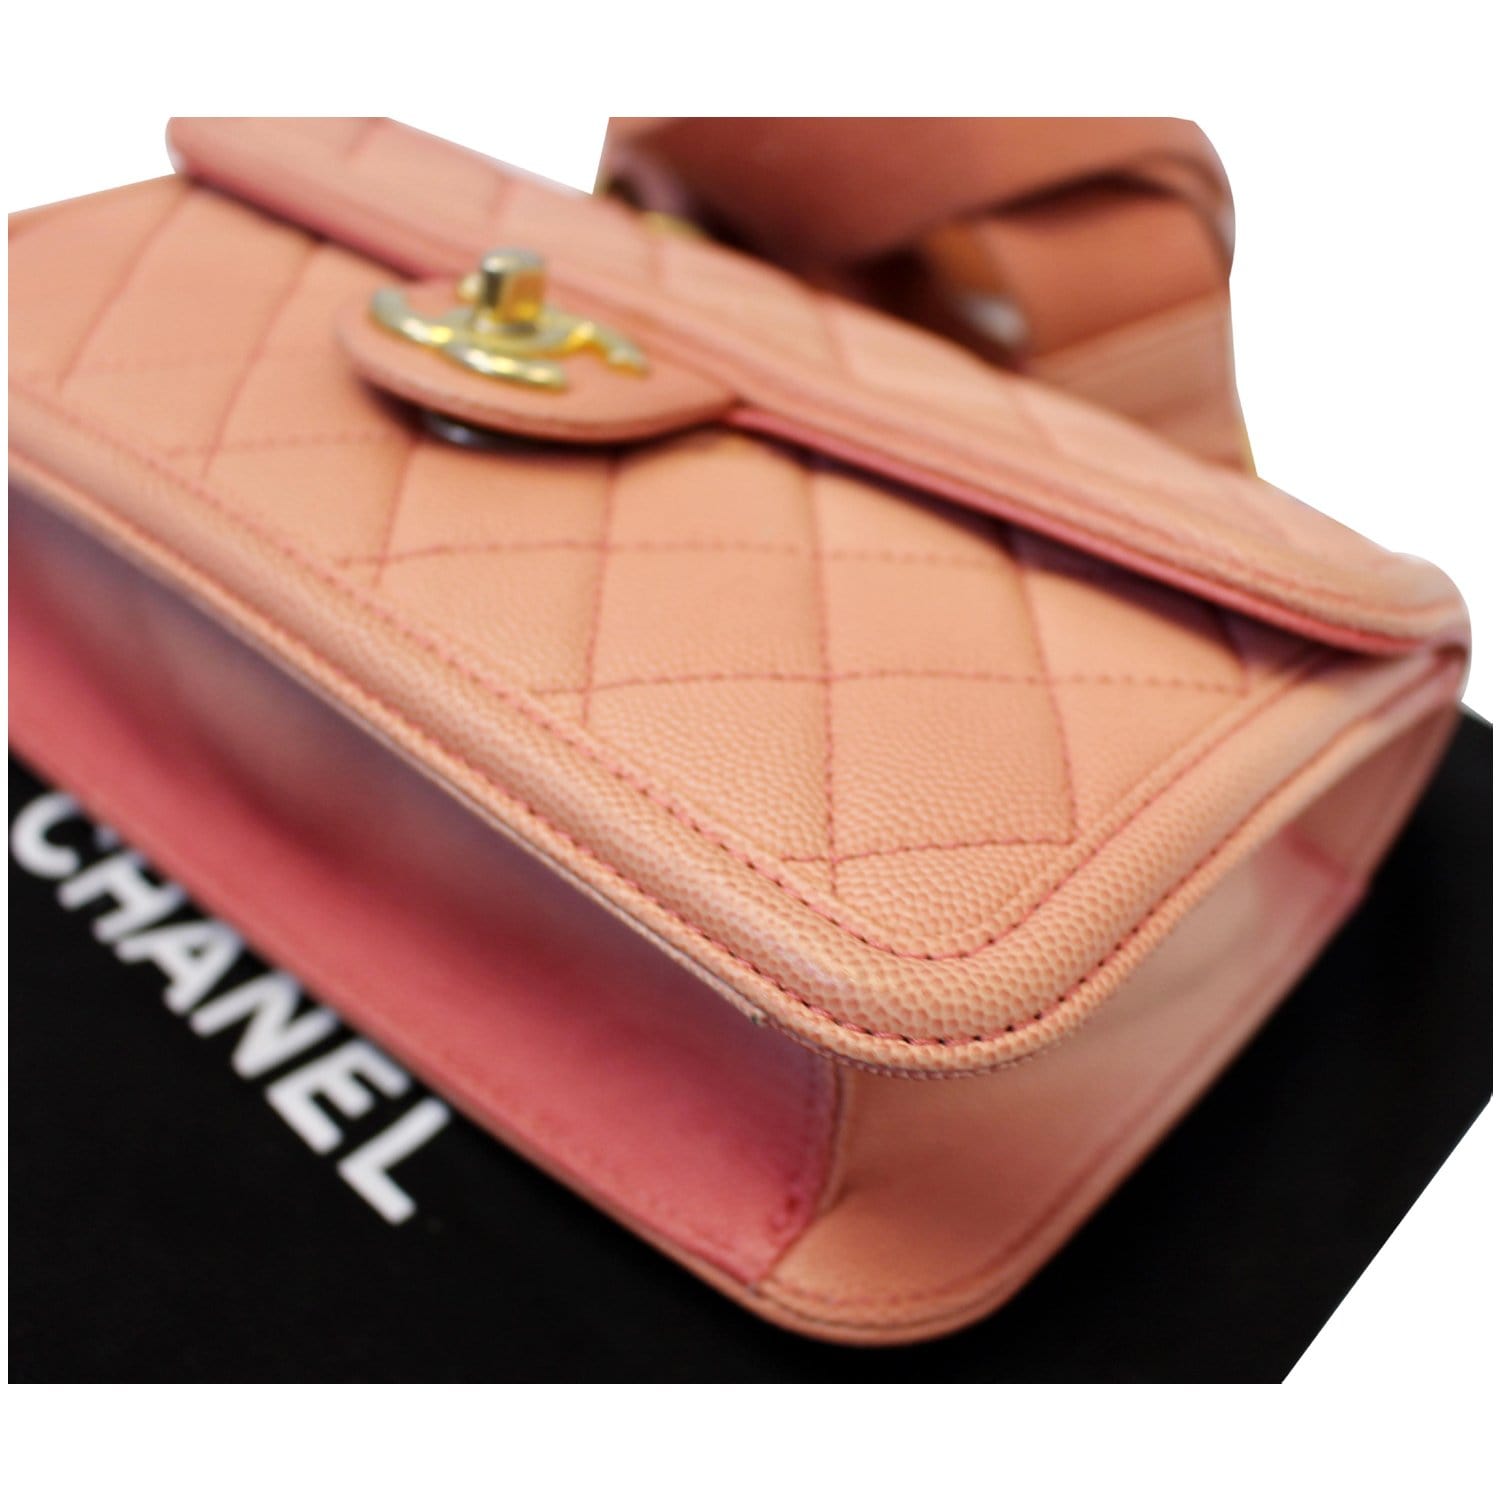 Chanel Sunset On The Sea Caviar Leather Small Flap in Coral